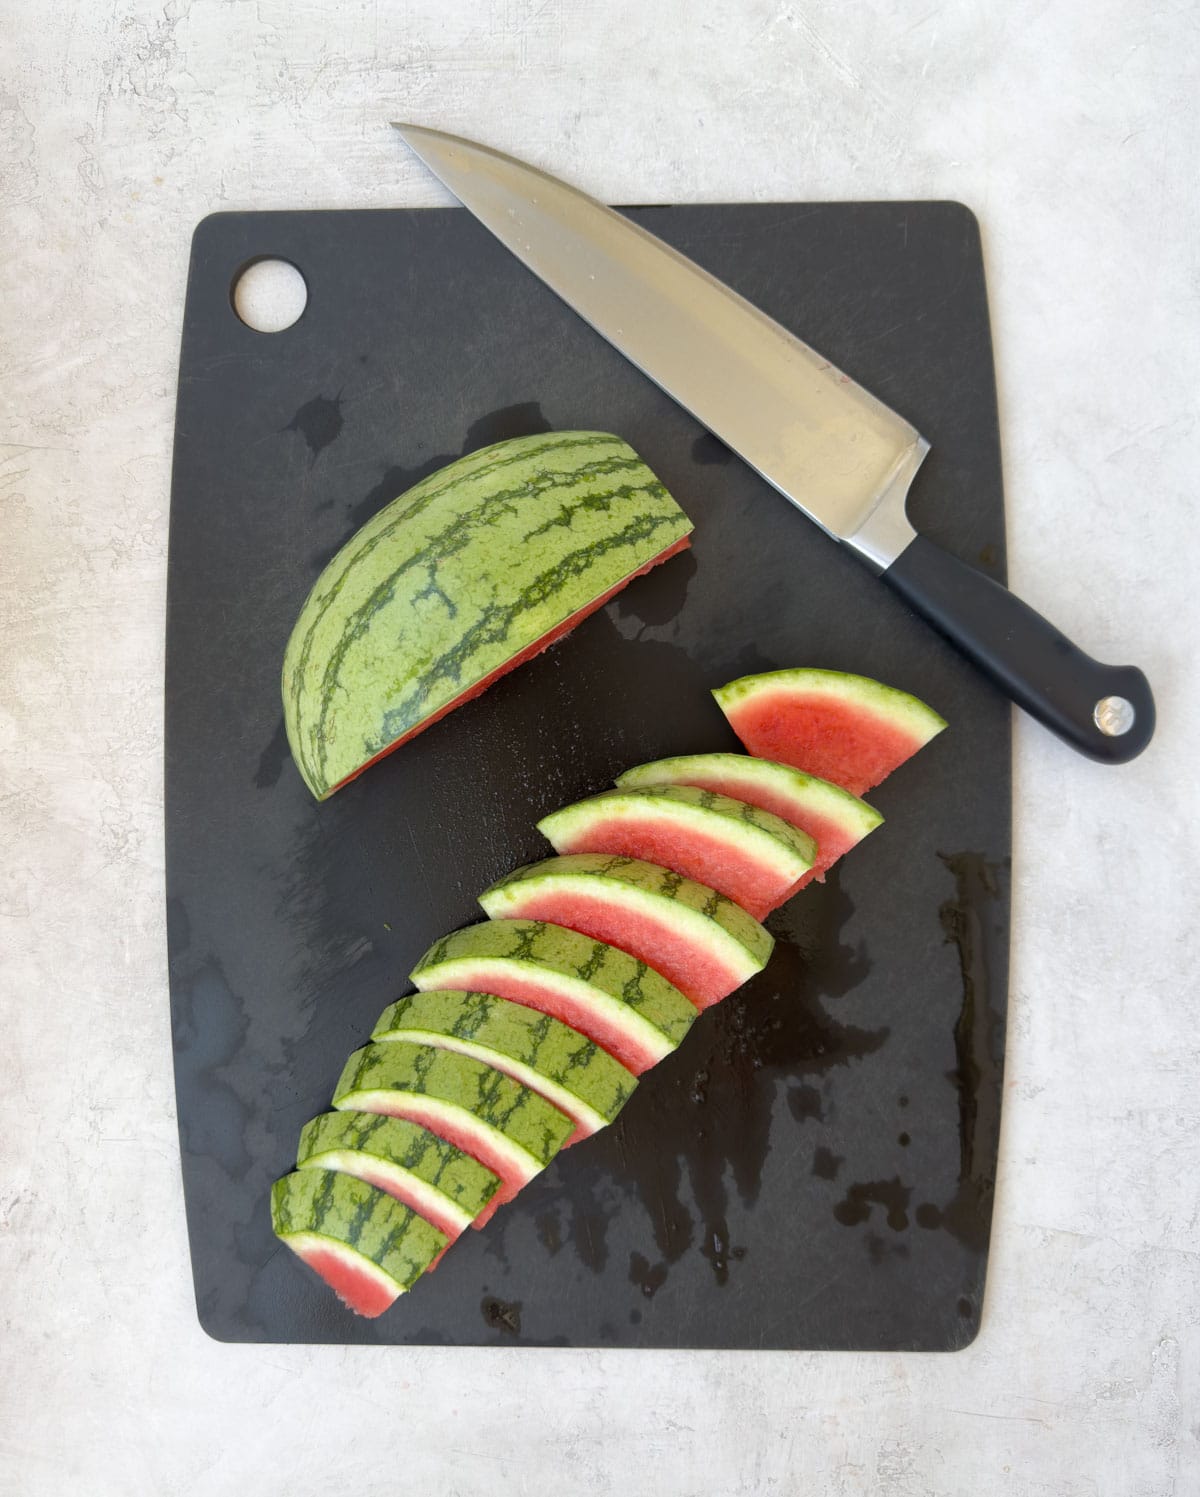 Showing how to cut watermelon slices from a quarter melon. 